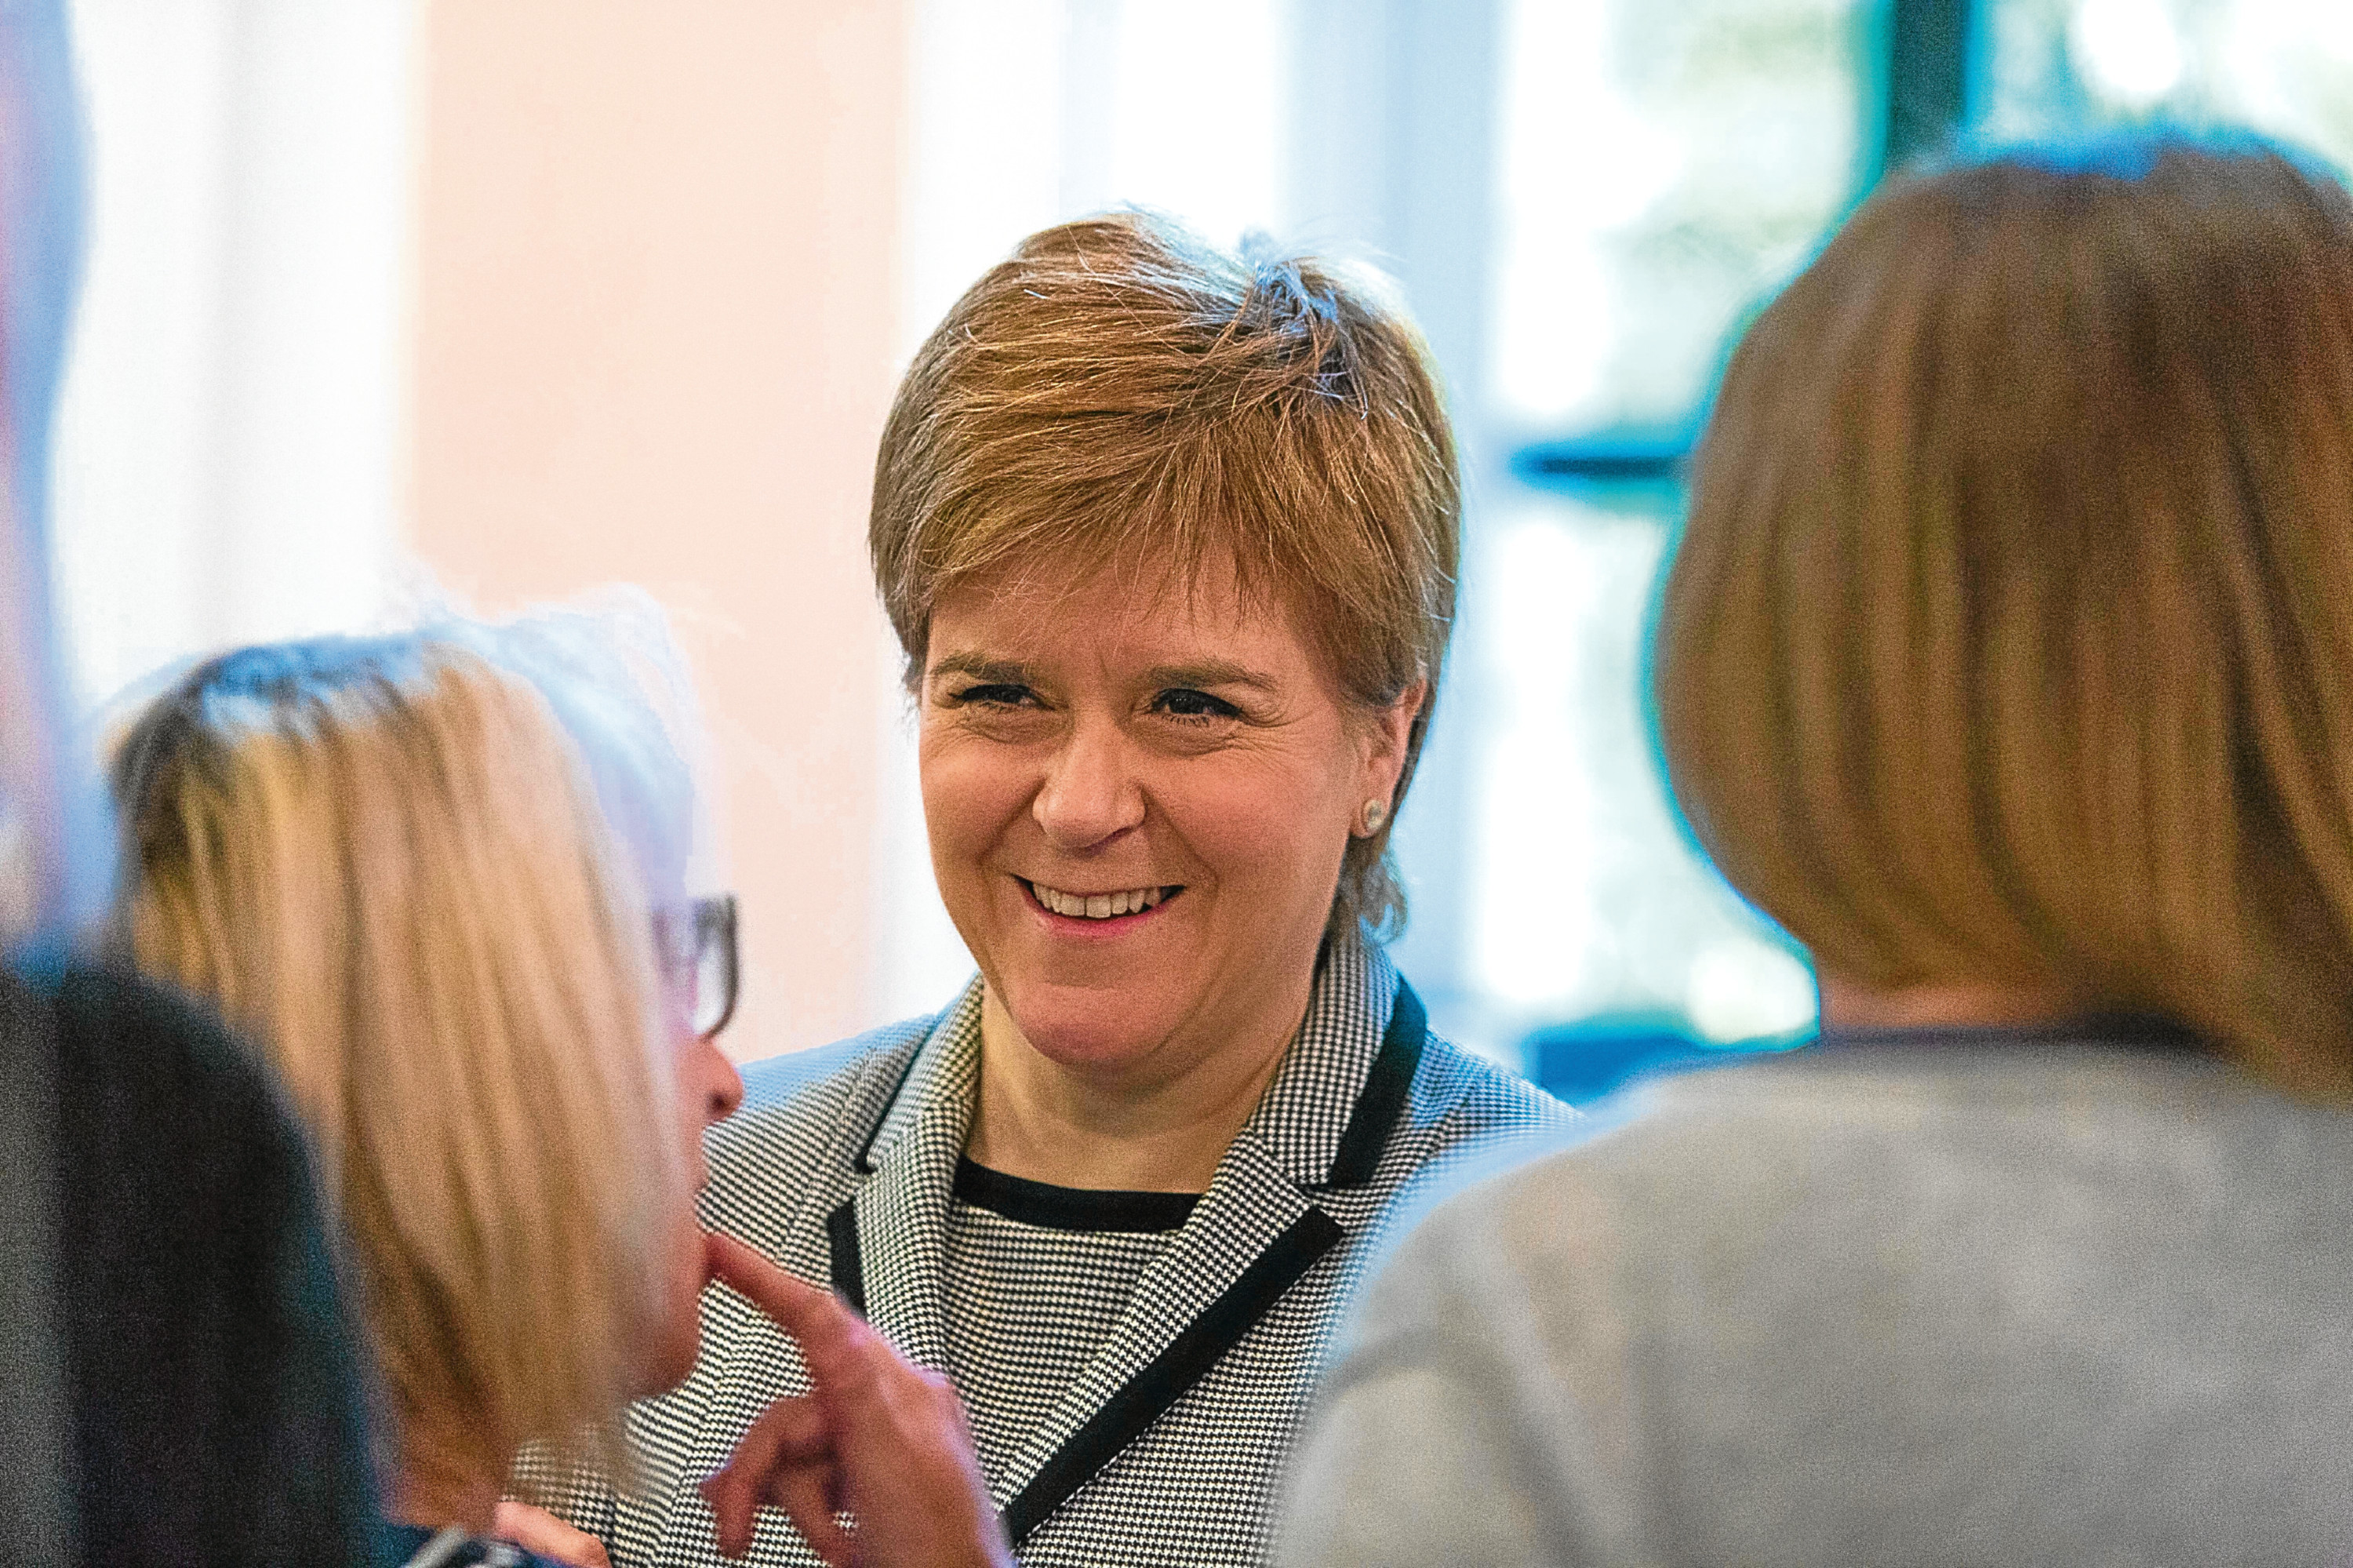 Nicola Sturgeon announced plans for the new benefits centre on a visit to Dundee this week.